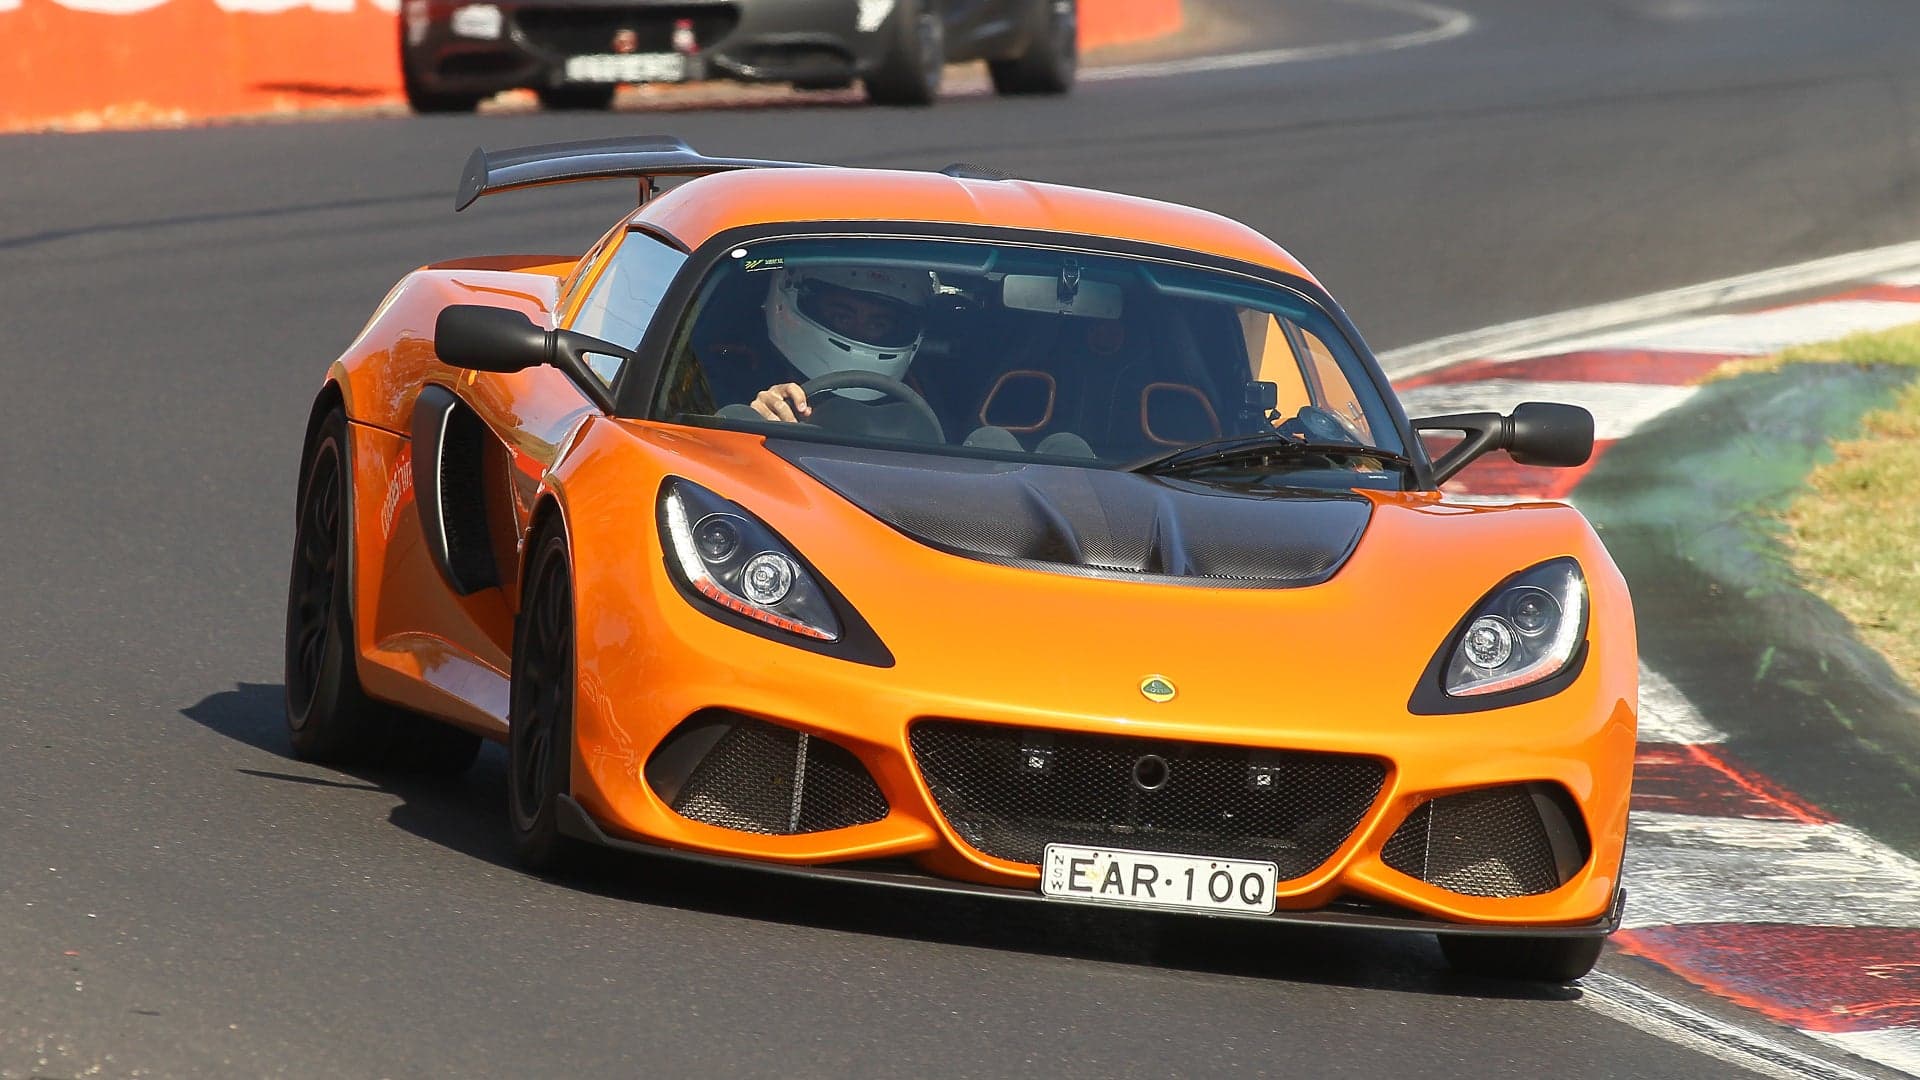 2020 Lotus Exige 410 Sport On-Track Review: The Hell-Raiser from Hethel Conquers Mount Panorama